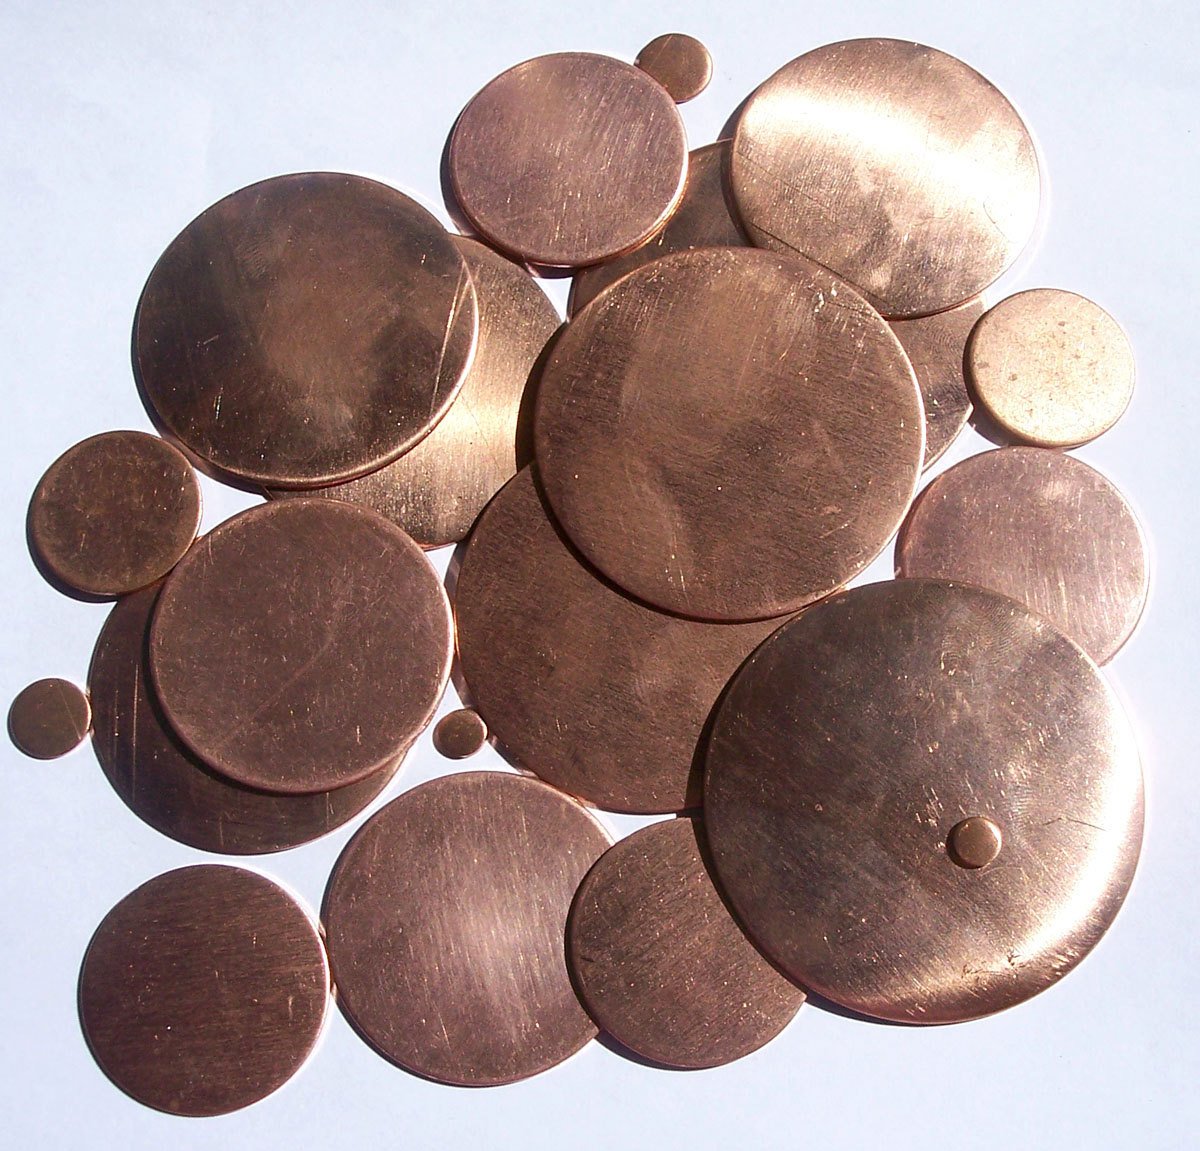 Disc 25mm Blank 22G Pure Metal, Cutout for Enameling Stamping Texturing - Metalworking Supply - 6 Pieces